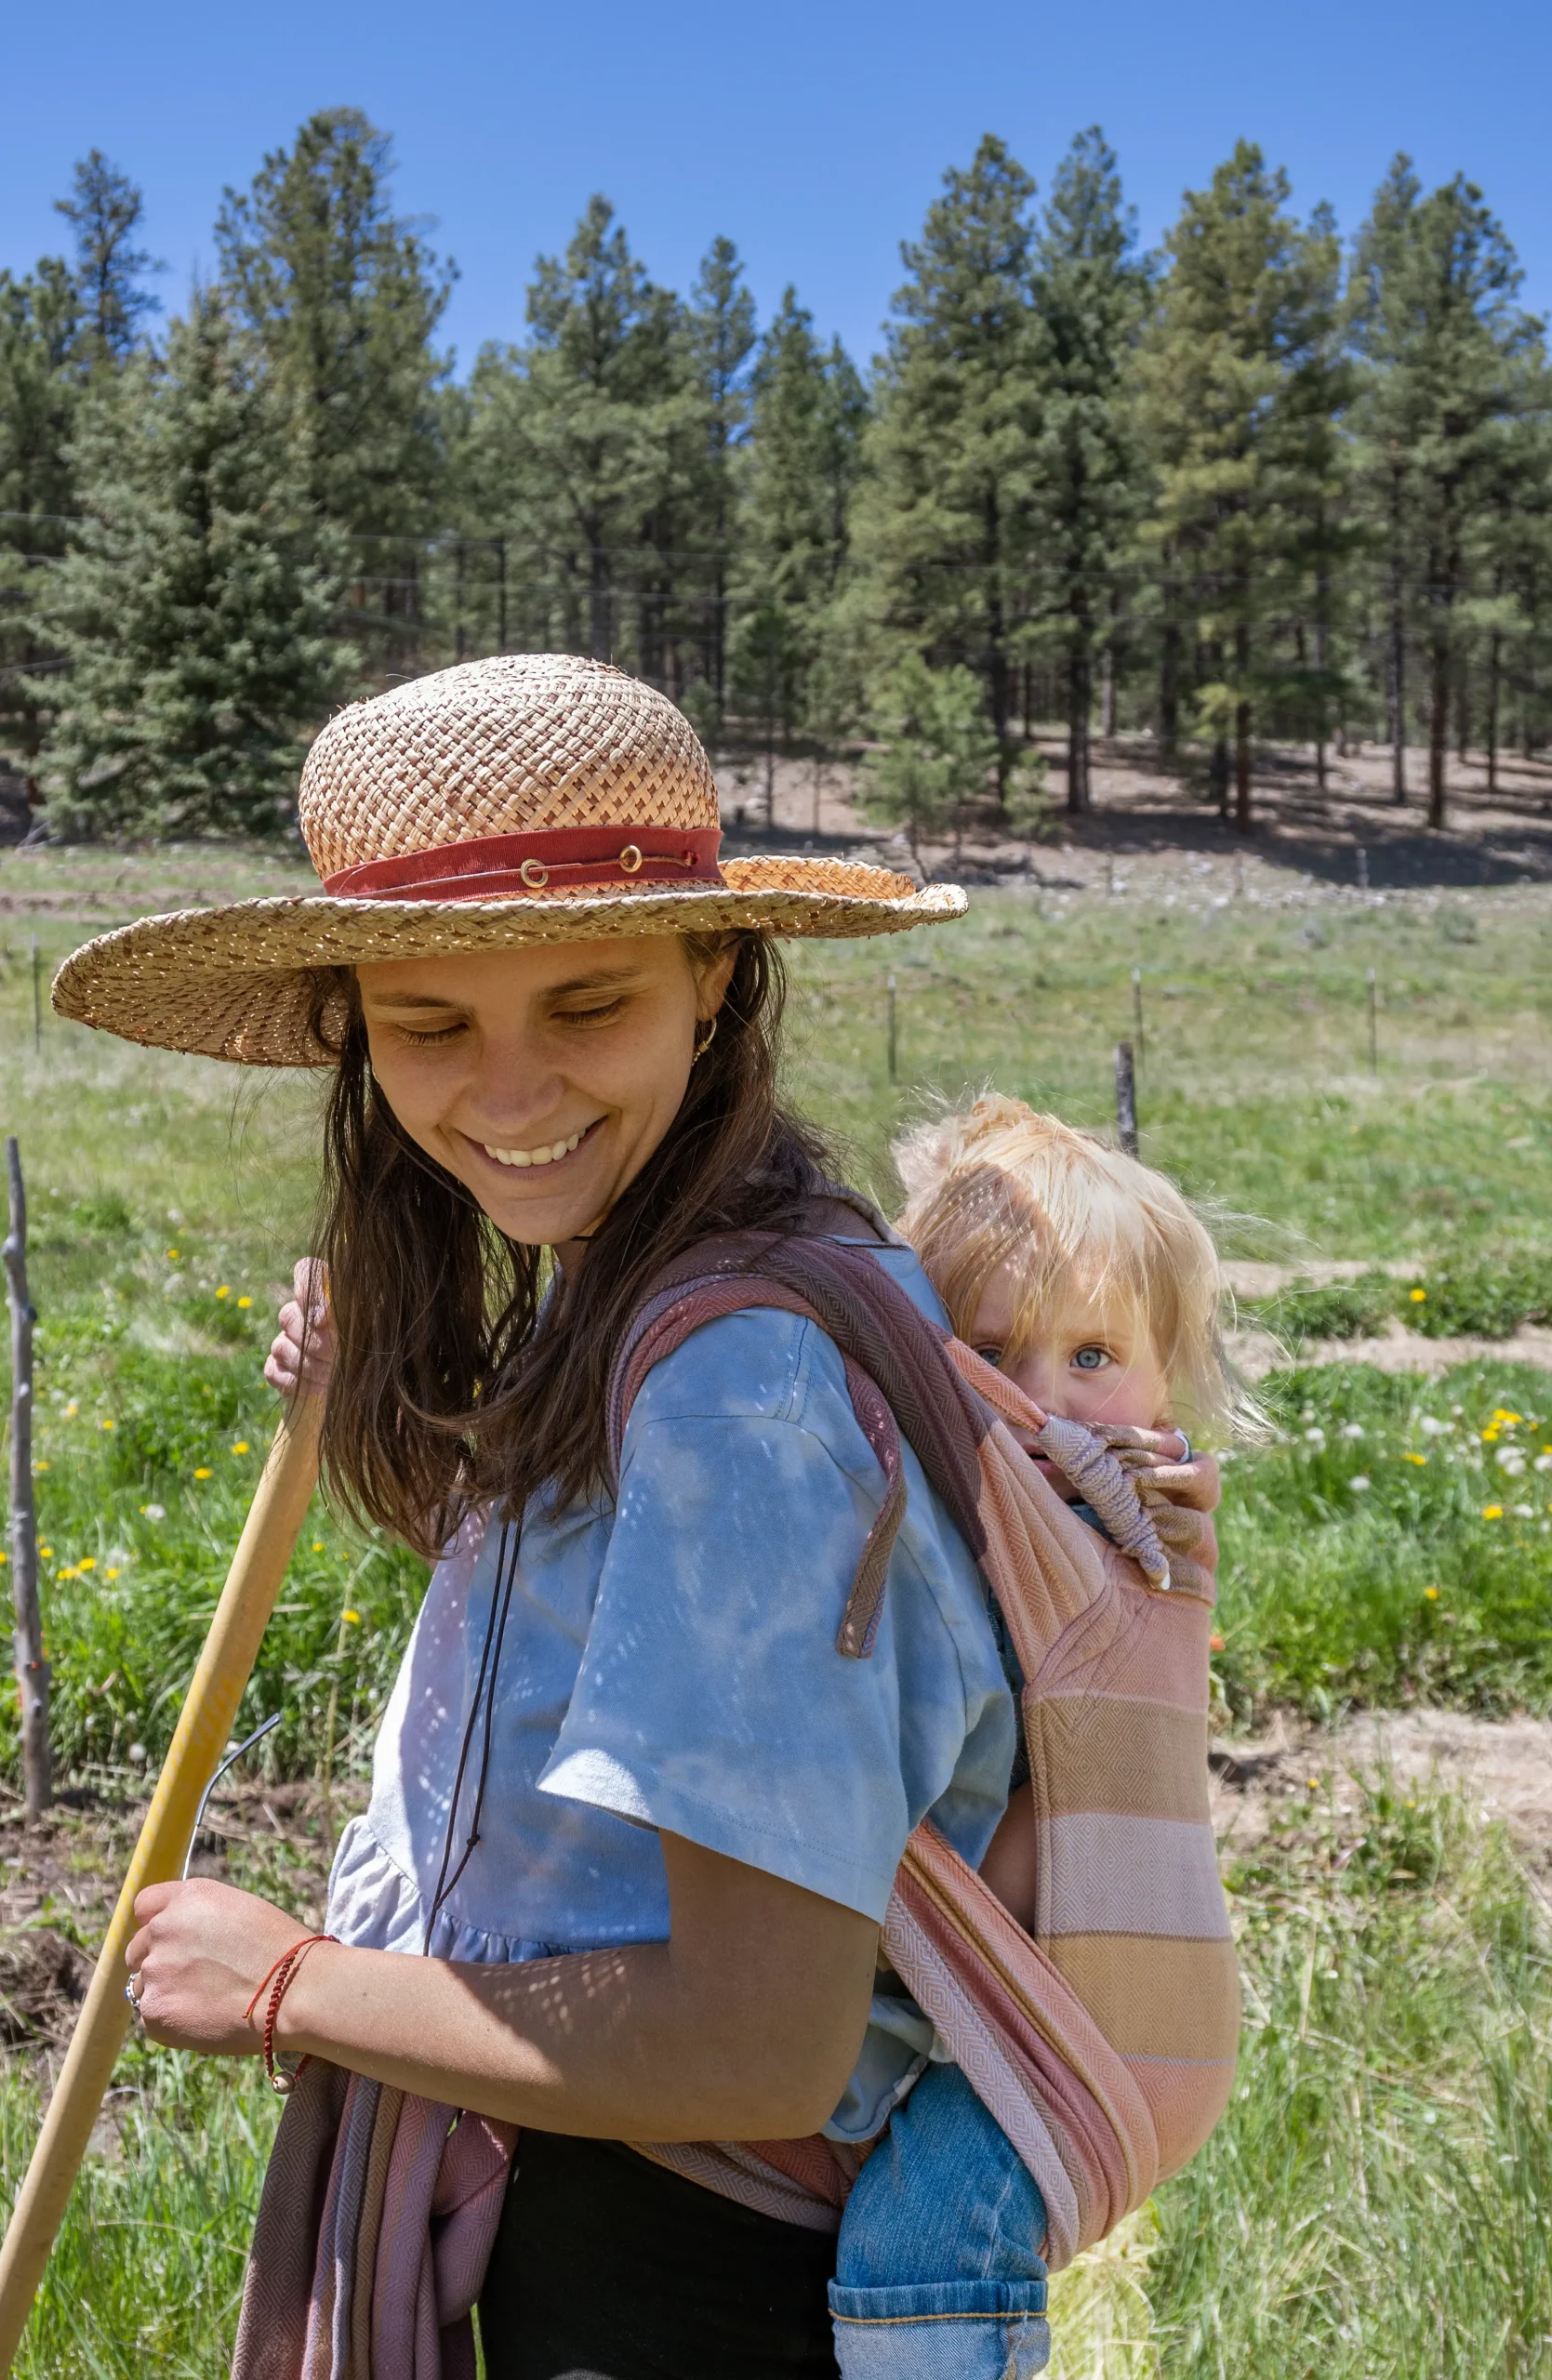 Rilee Burgan and her daughter, Artemis, loving nature at their northern New Mexico farm.